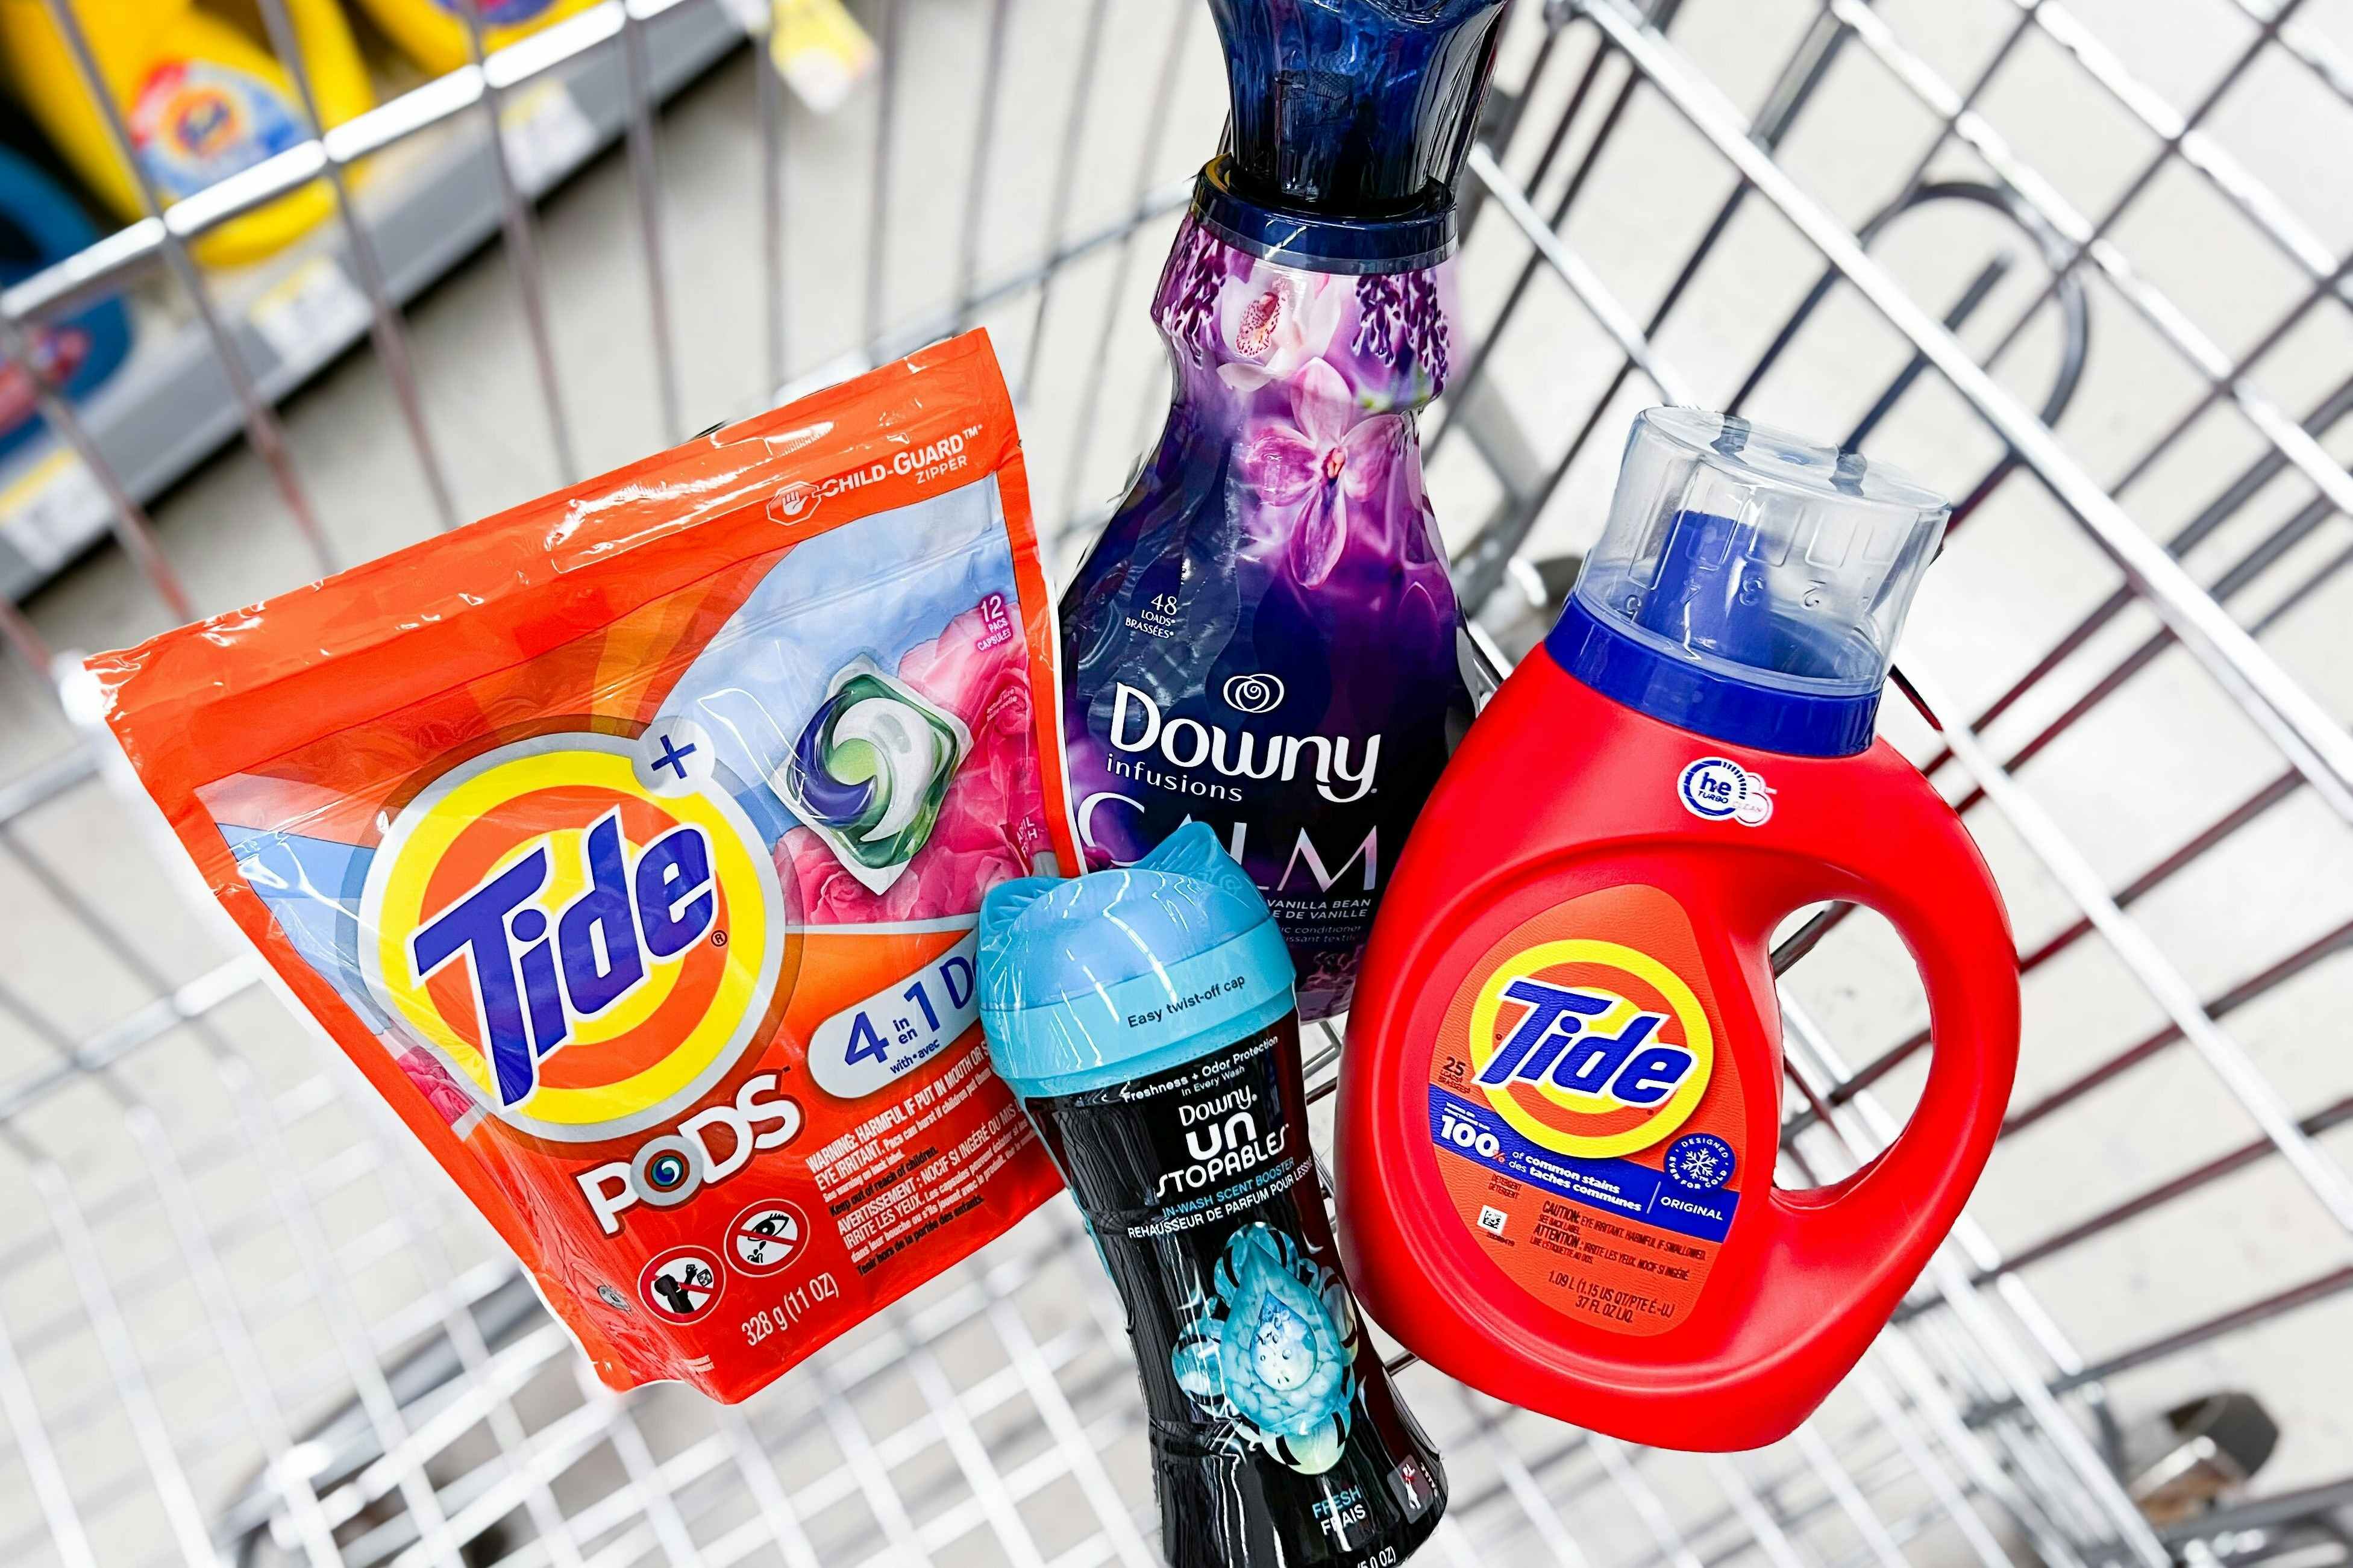 Stock Up on $1.38 Tide and Downy Laundry Care at Walgreens